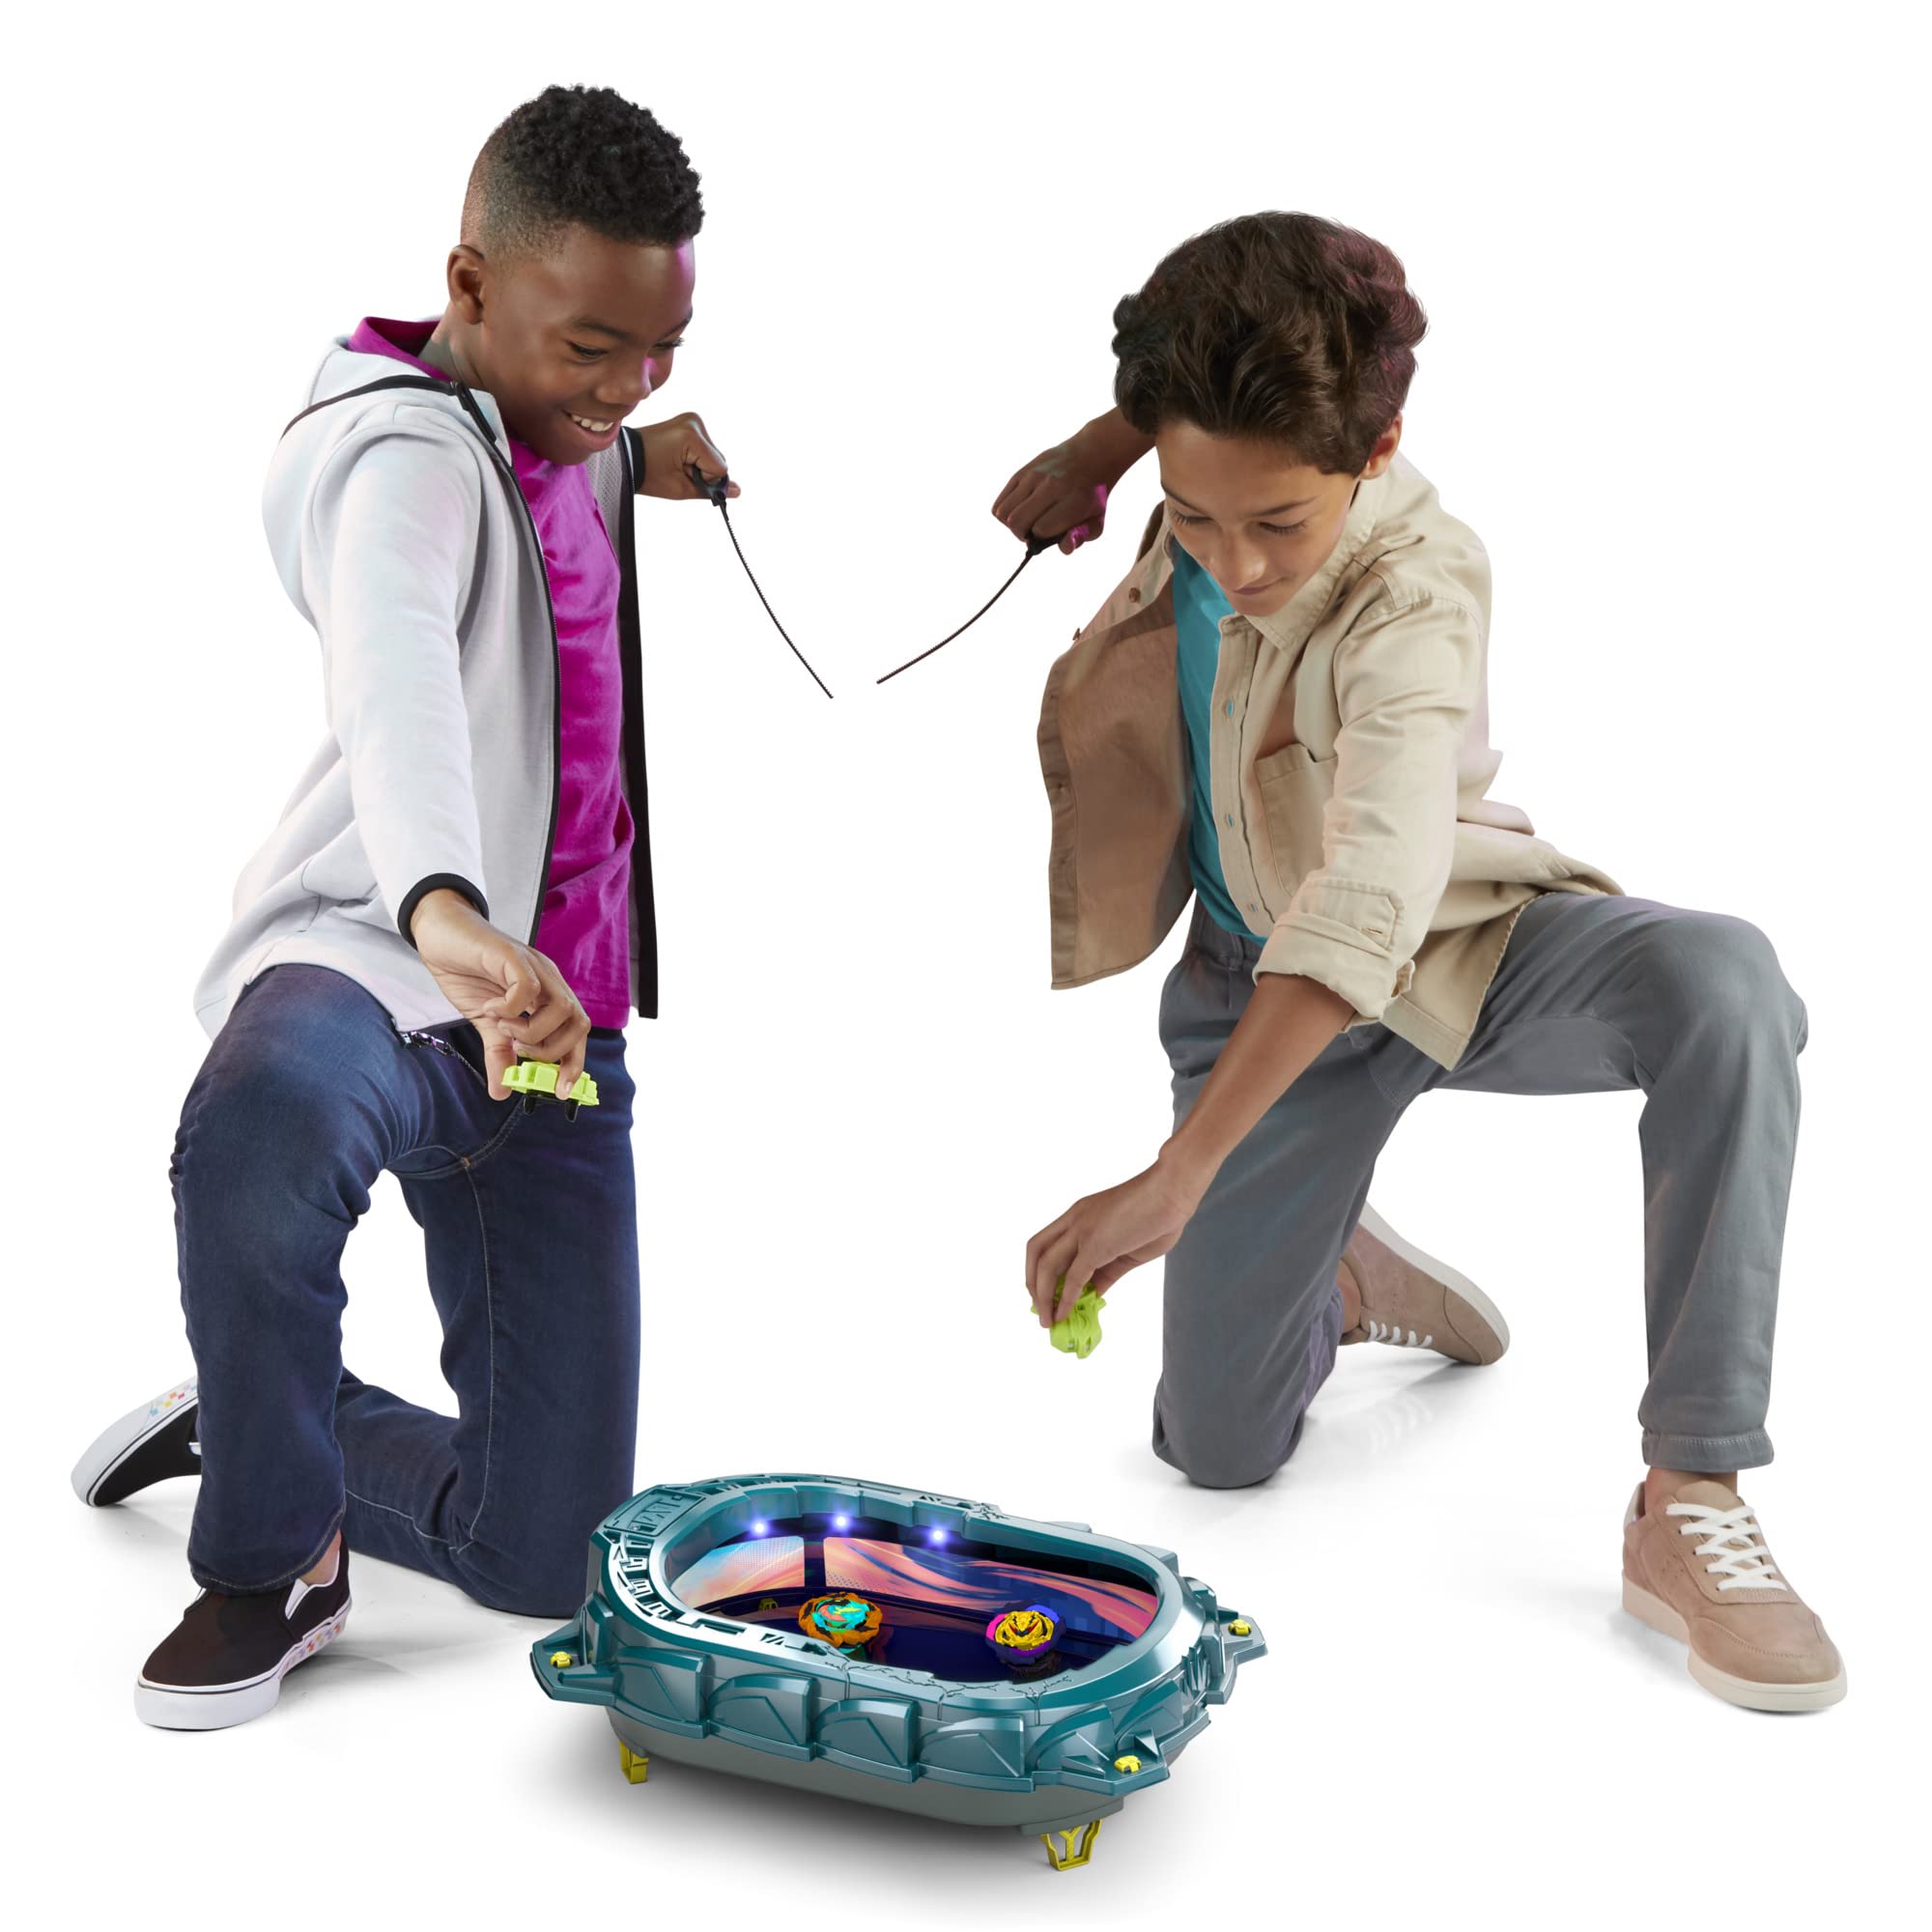 Beyblade Burst QuadStrike Light Ignite Battle Set, with Beyblade Stadium, 2 Spinning Tops, and 2 Beyblade Launchers, Toys for 8 Year Old Boys & Girls & Up (Amazon Exclusive)